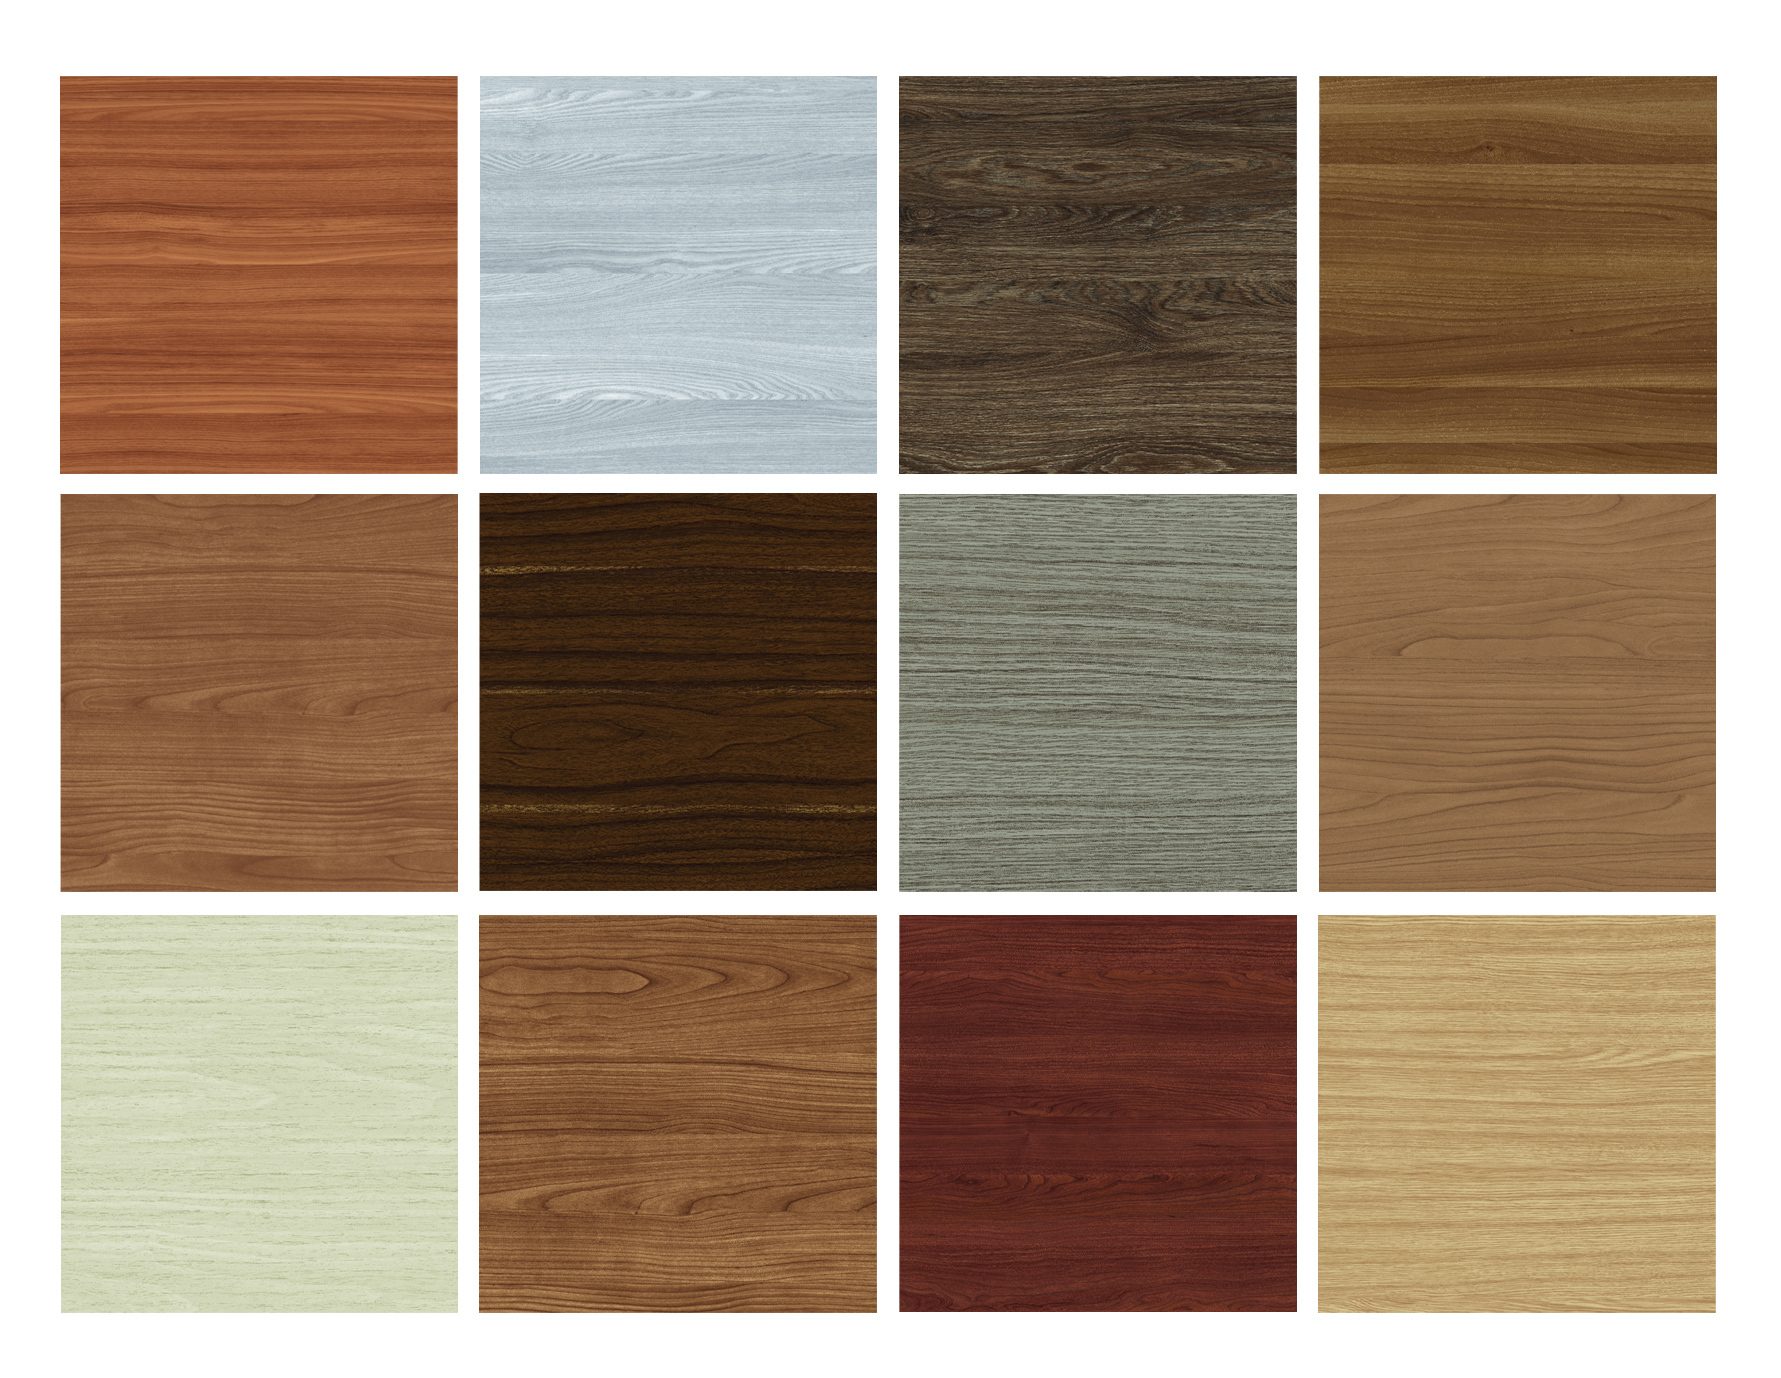 Set of 12 available wood finish options for CertainTeed Techstyle line.